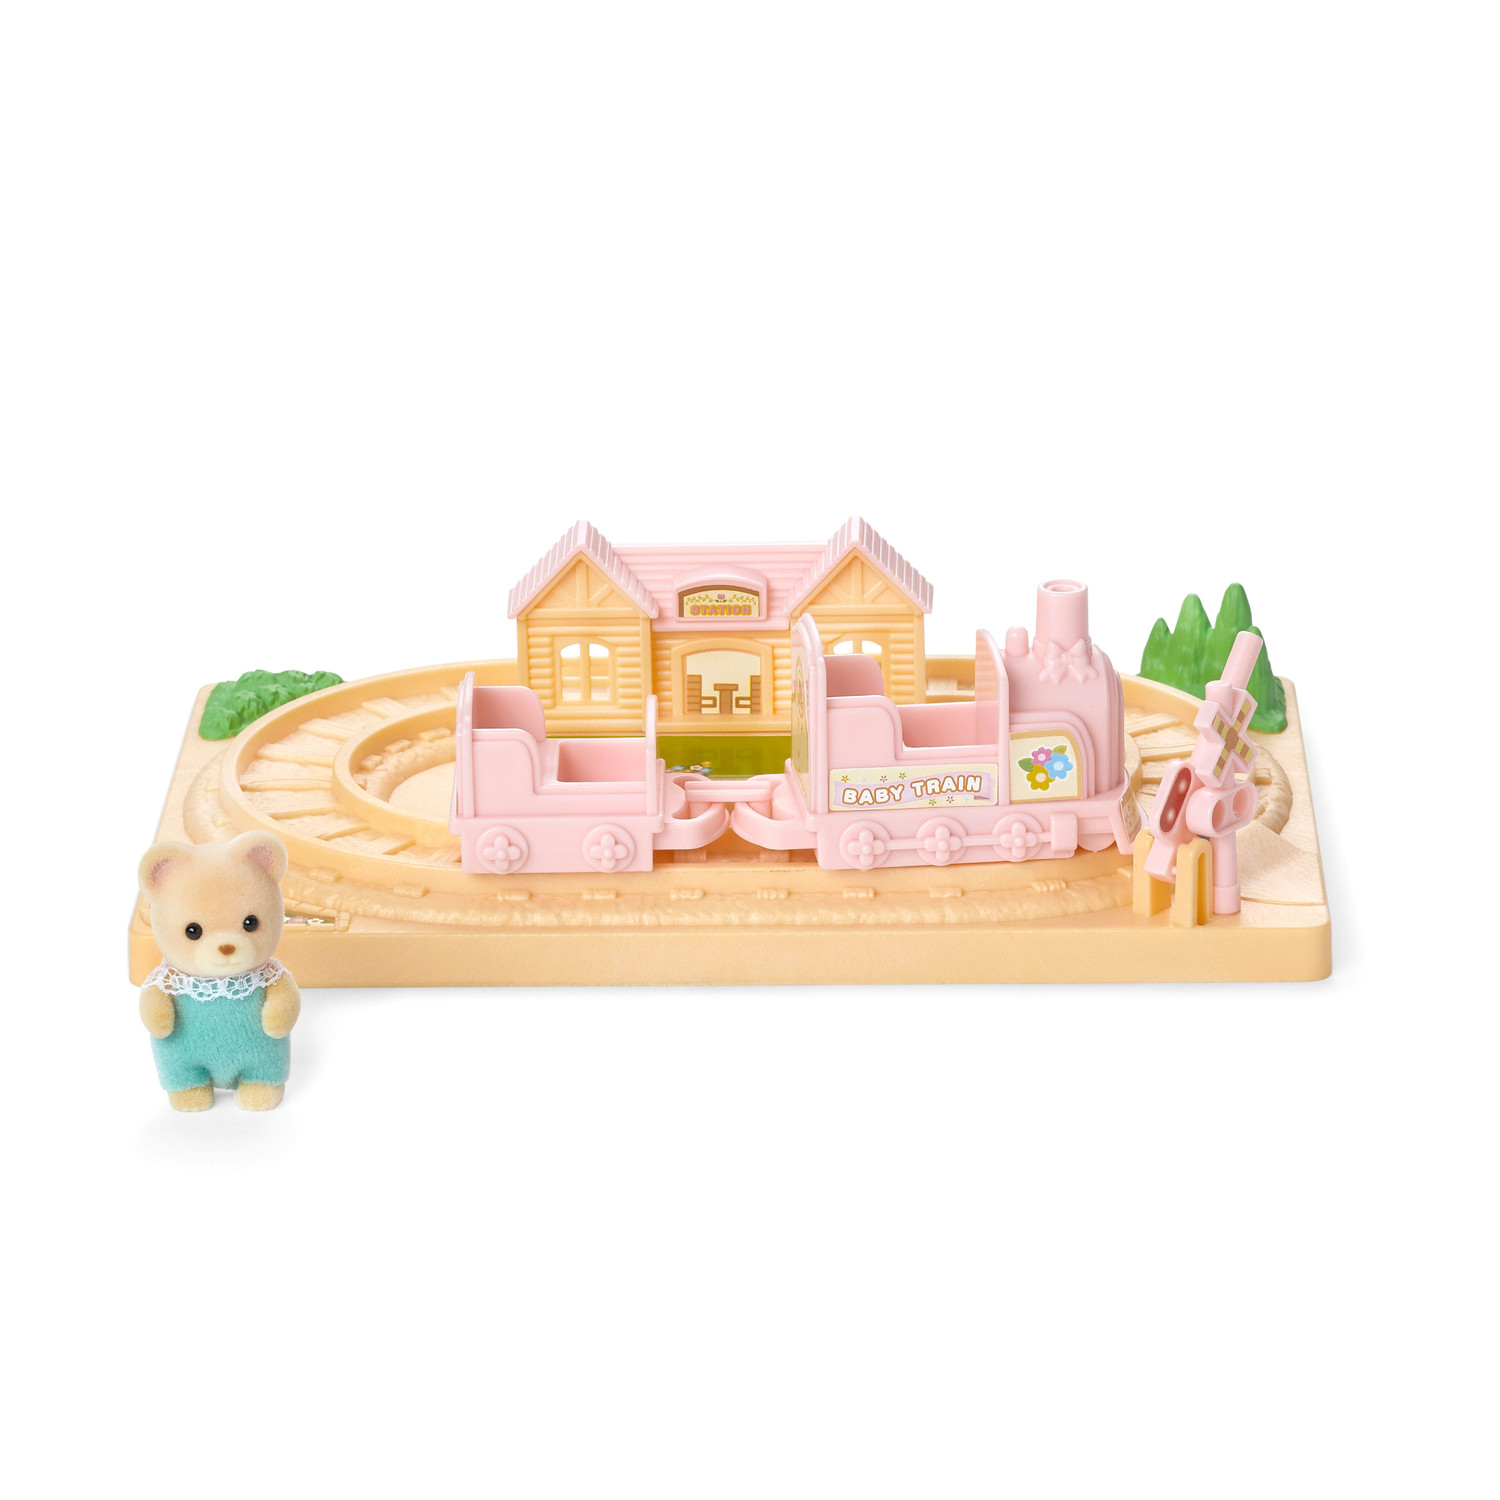 Calico Critters Baby Choo Choo Train, Dollhouse Playset with Figure - image 1 of 5